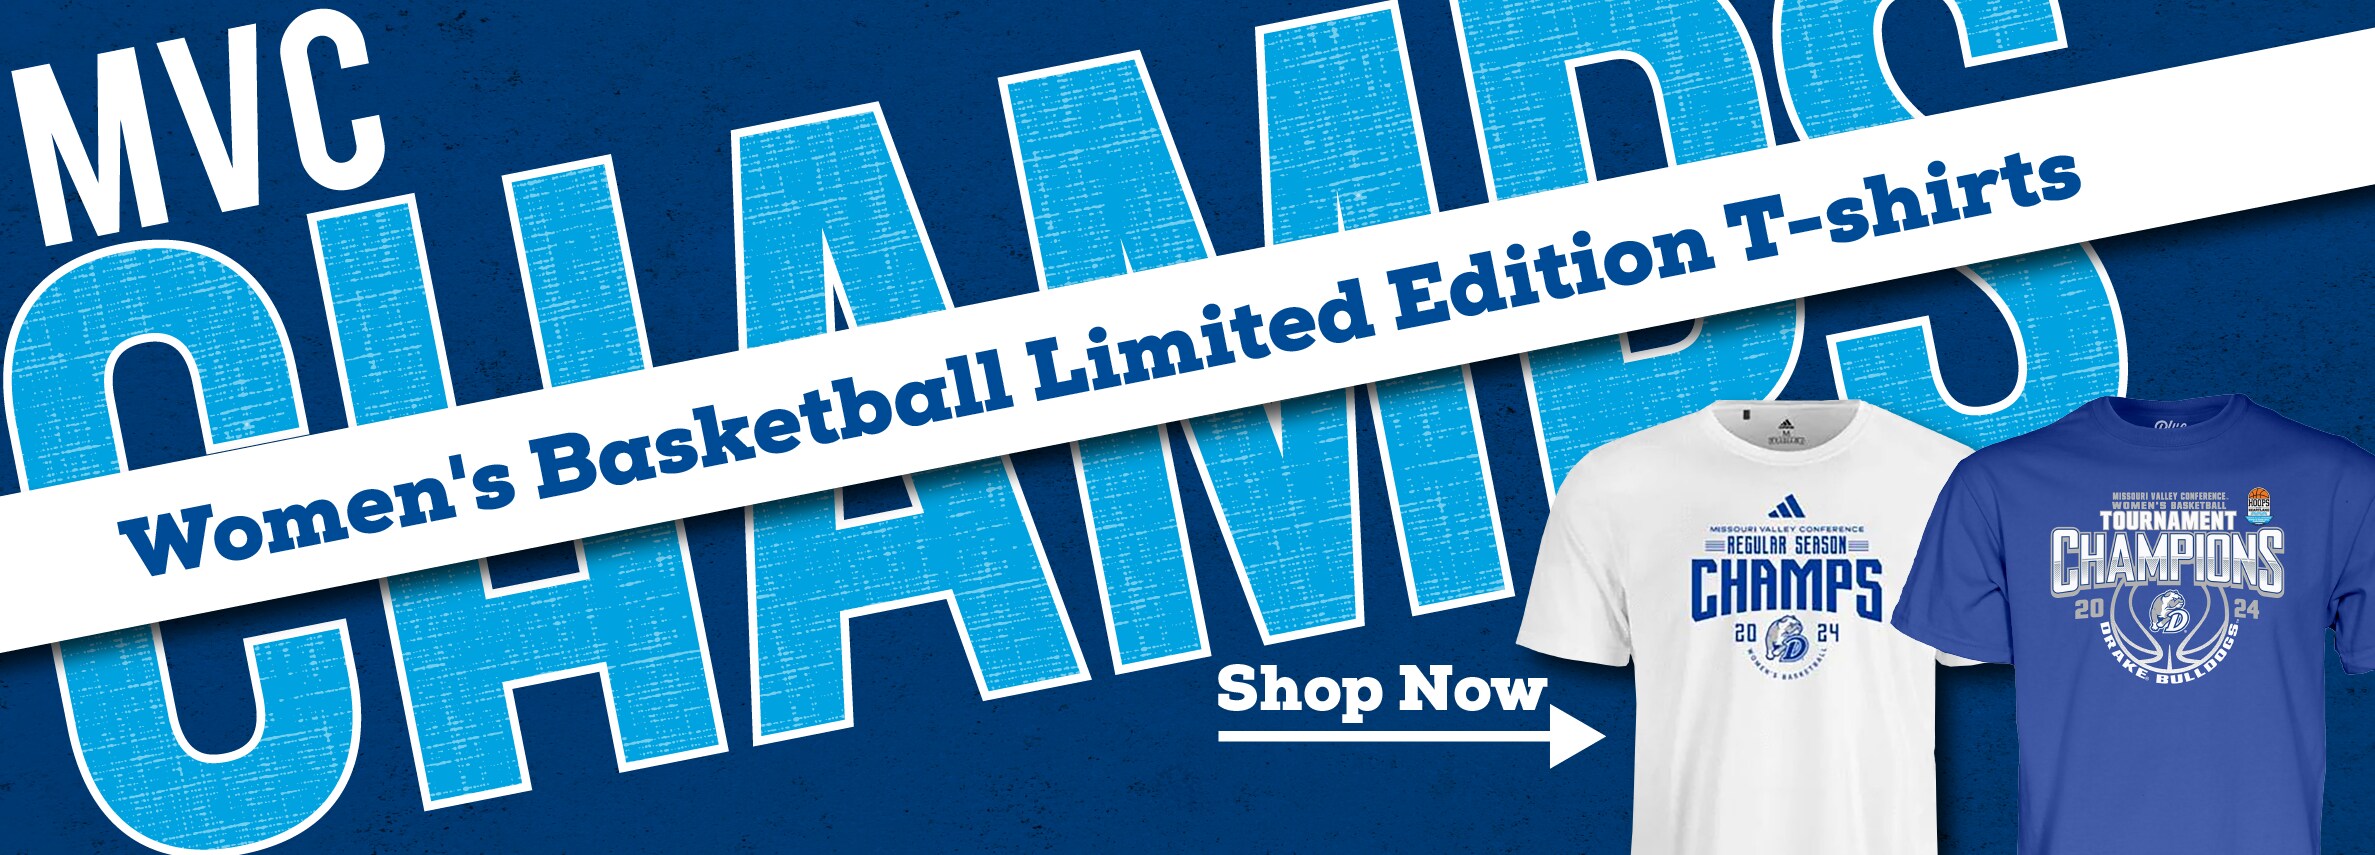 MVC Champs. Women's basketball limited edition t-shirts. shop now